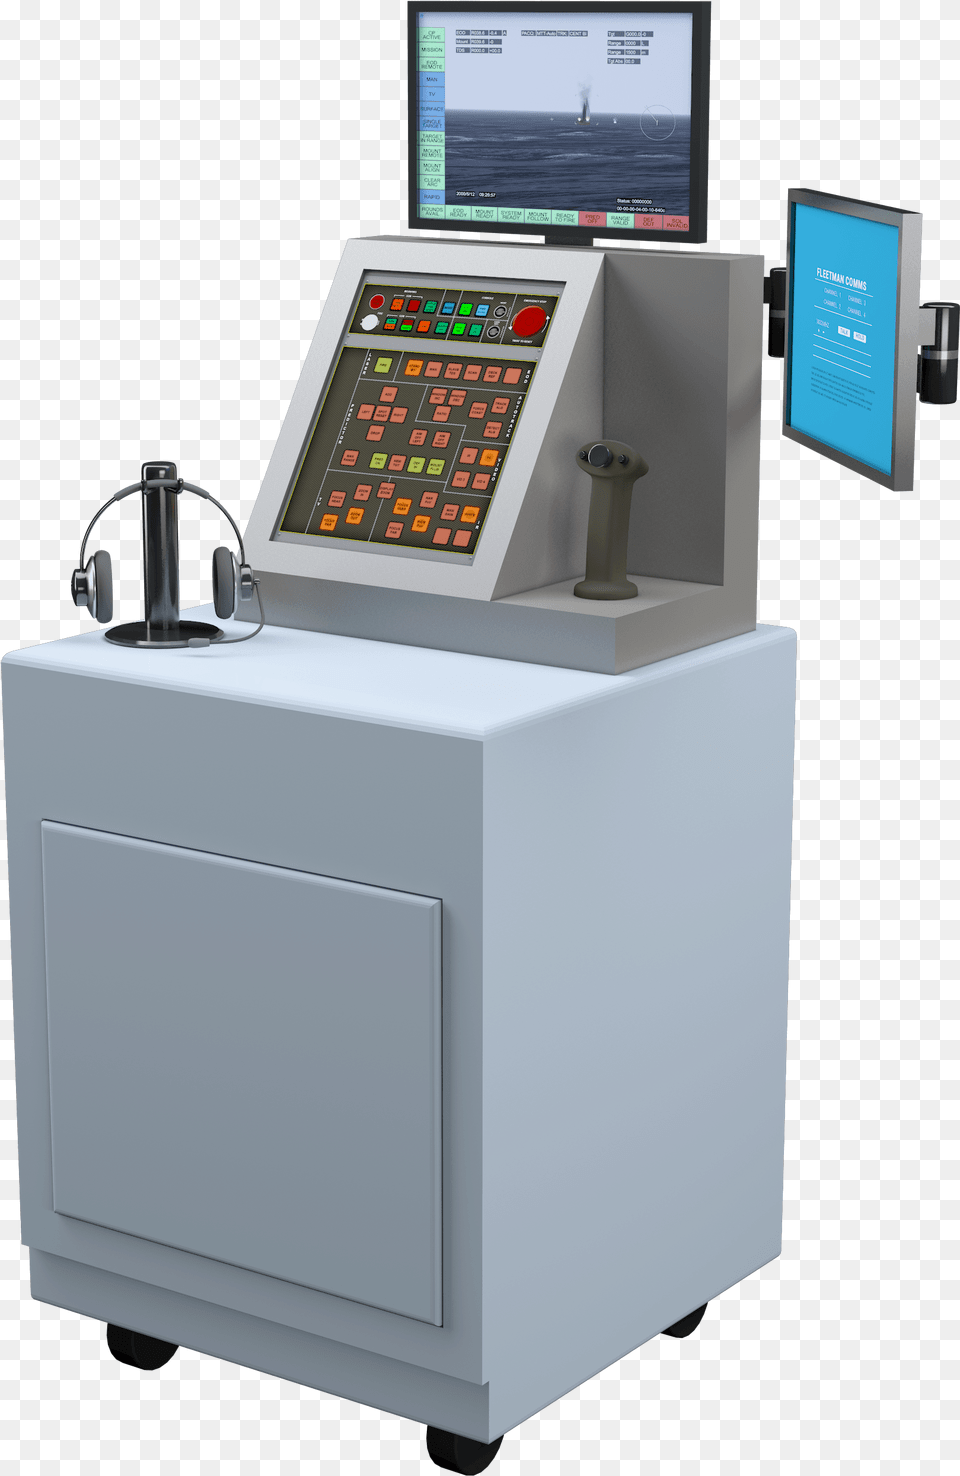 Cannon Fire Control Trainer Control Panel, Computer Hardware, Electronics, Hardware, Kiosk Free Transparent Png